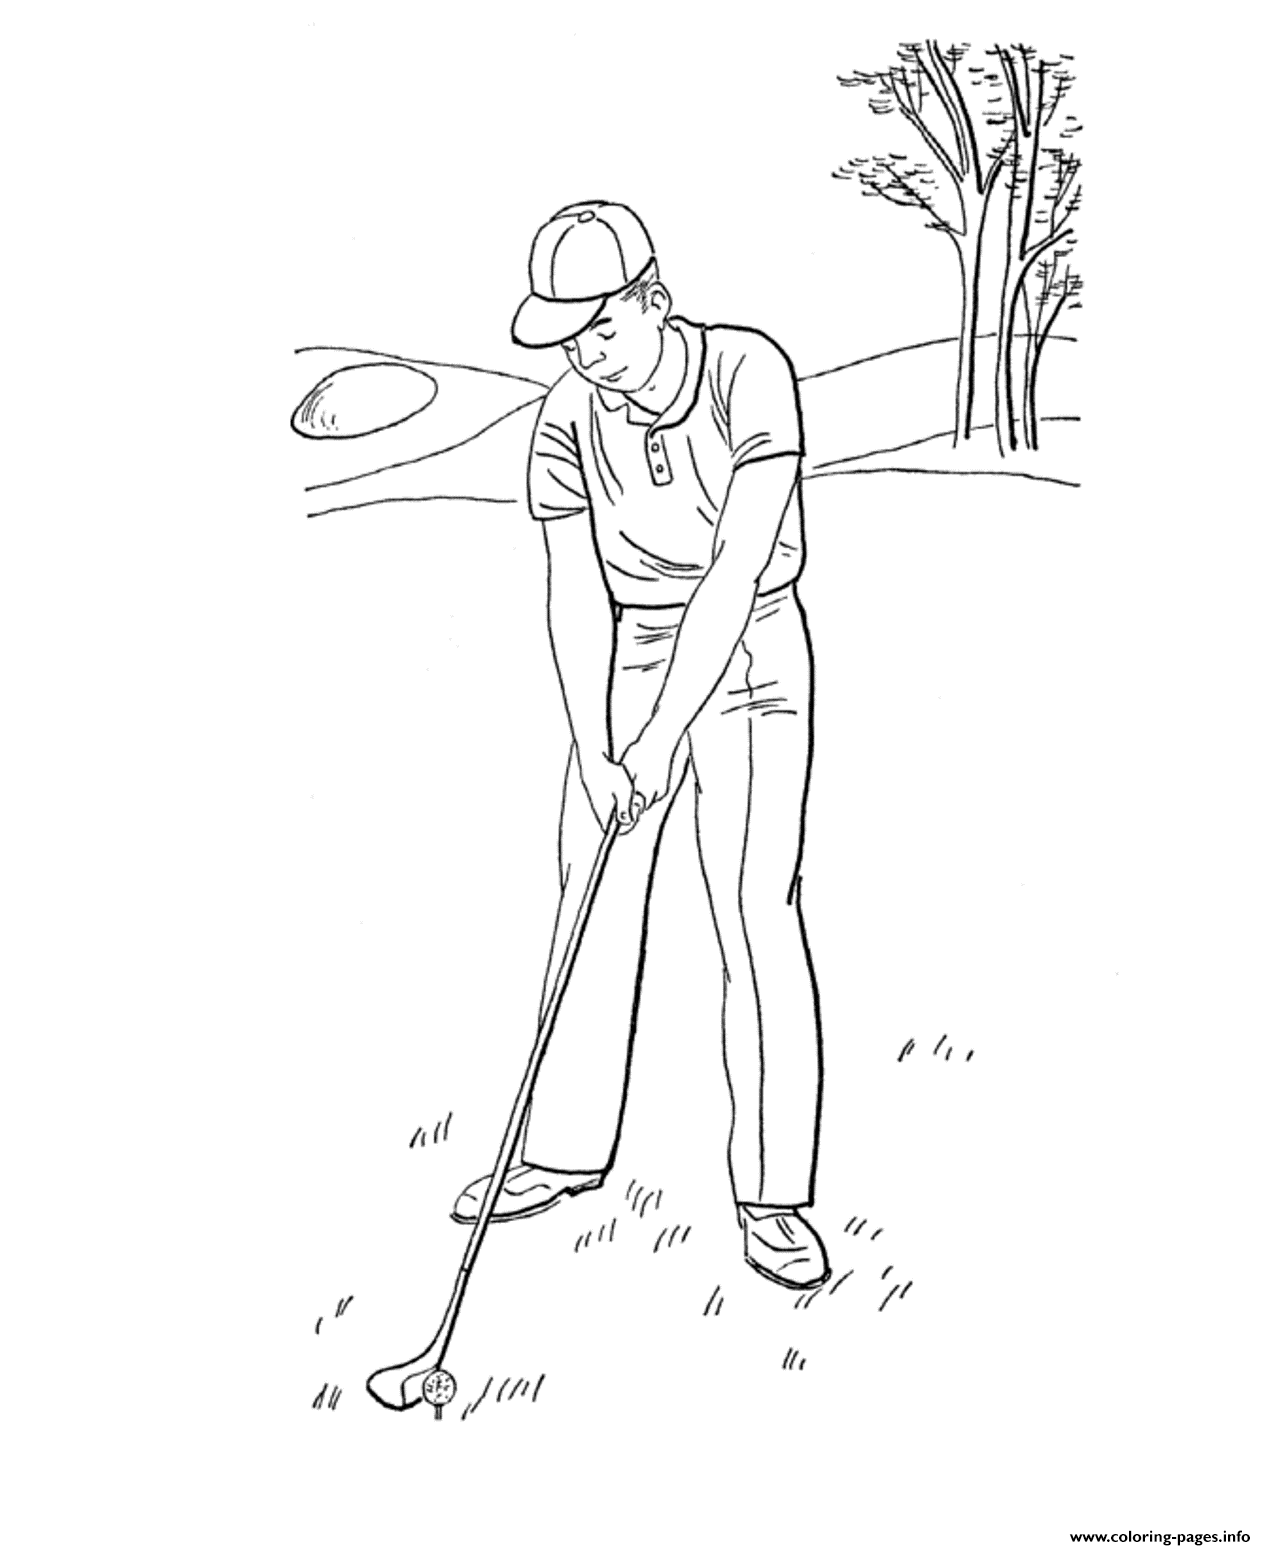 Summer Golf Sports S88ef coloring